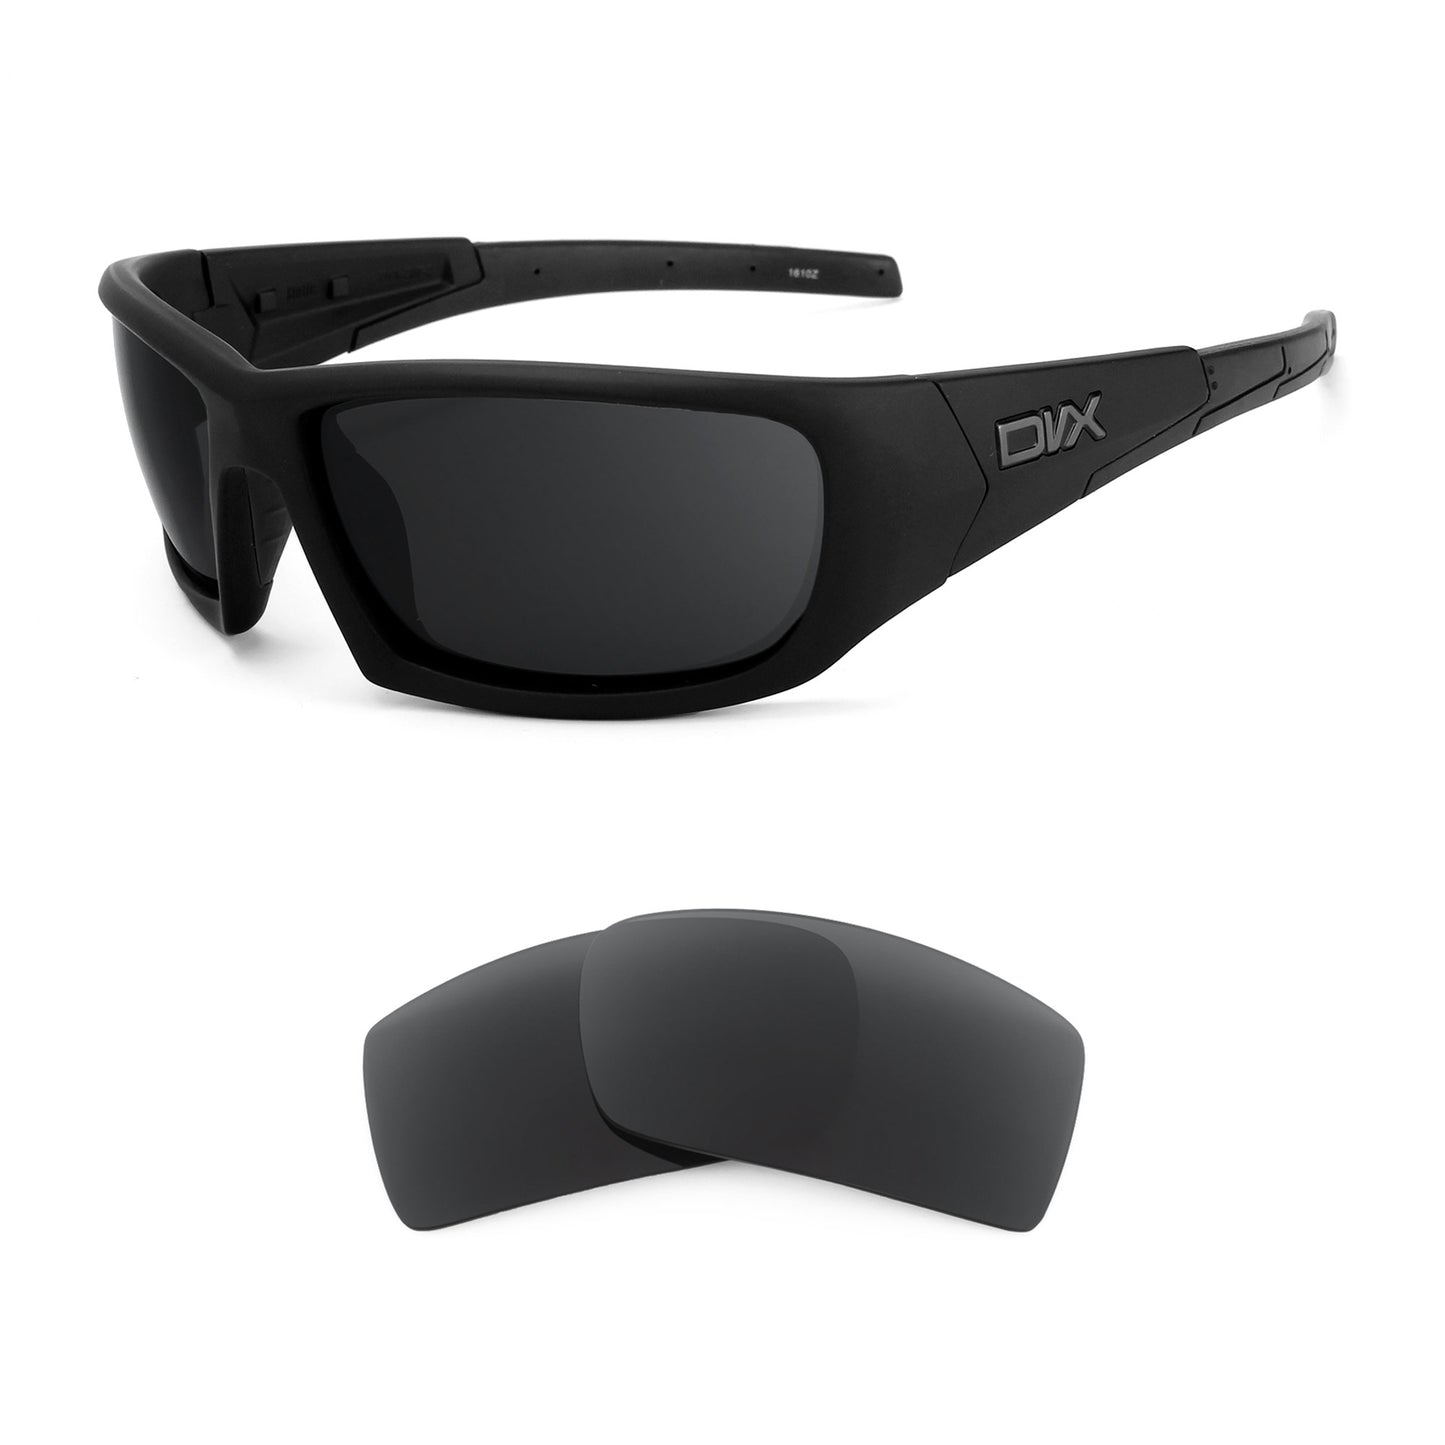 DVX Eyewear Static sunglasses with replacement lenses